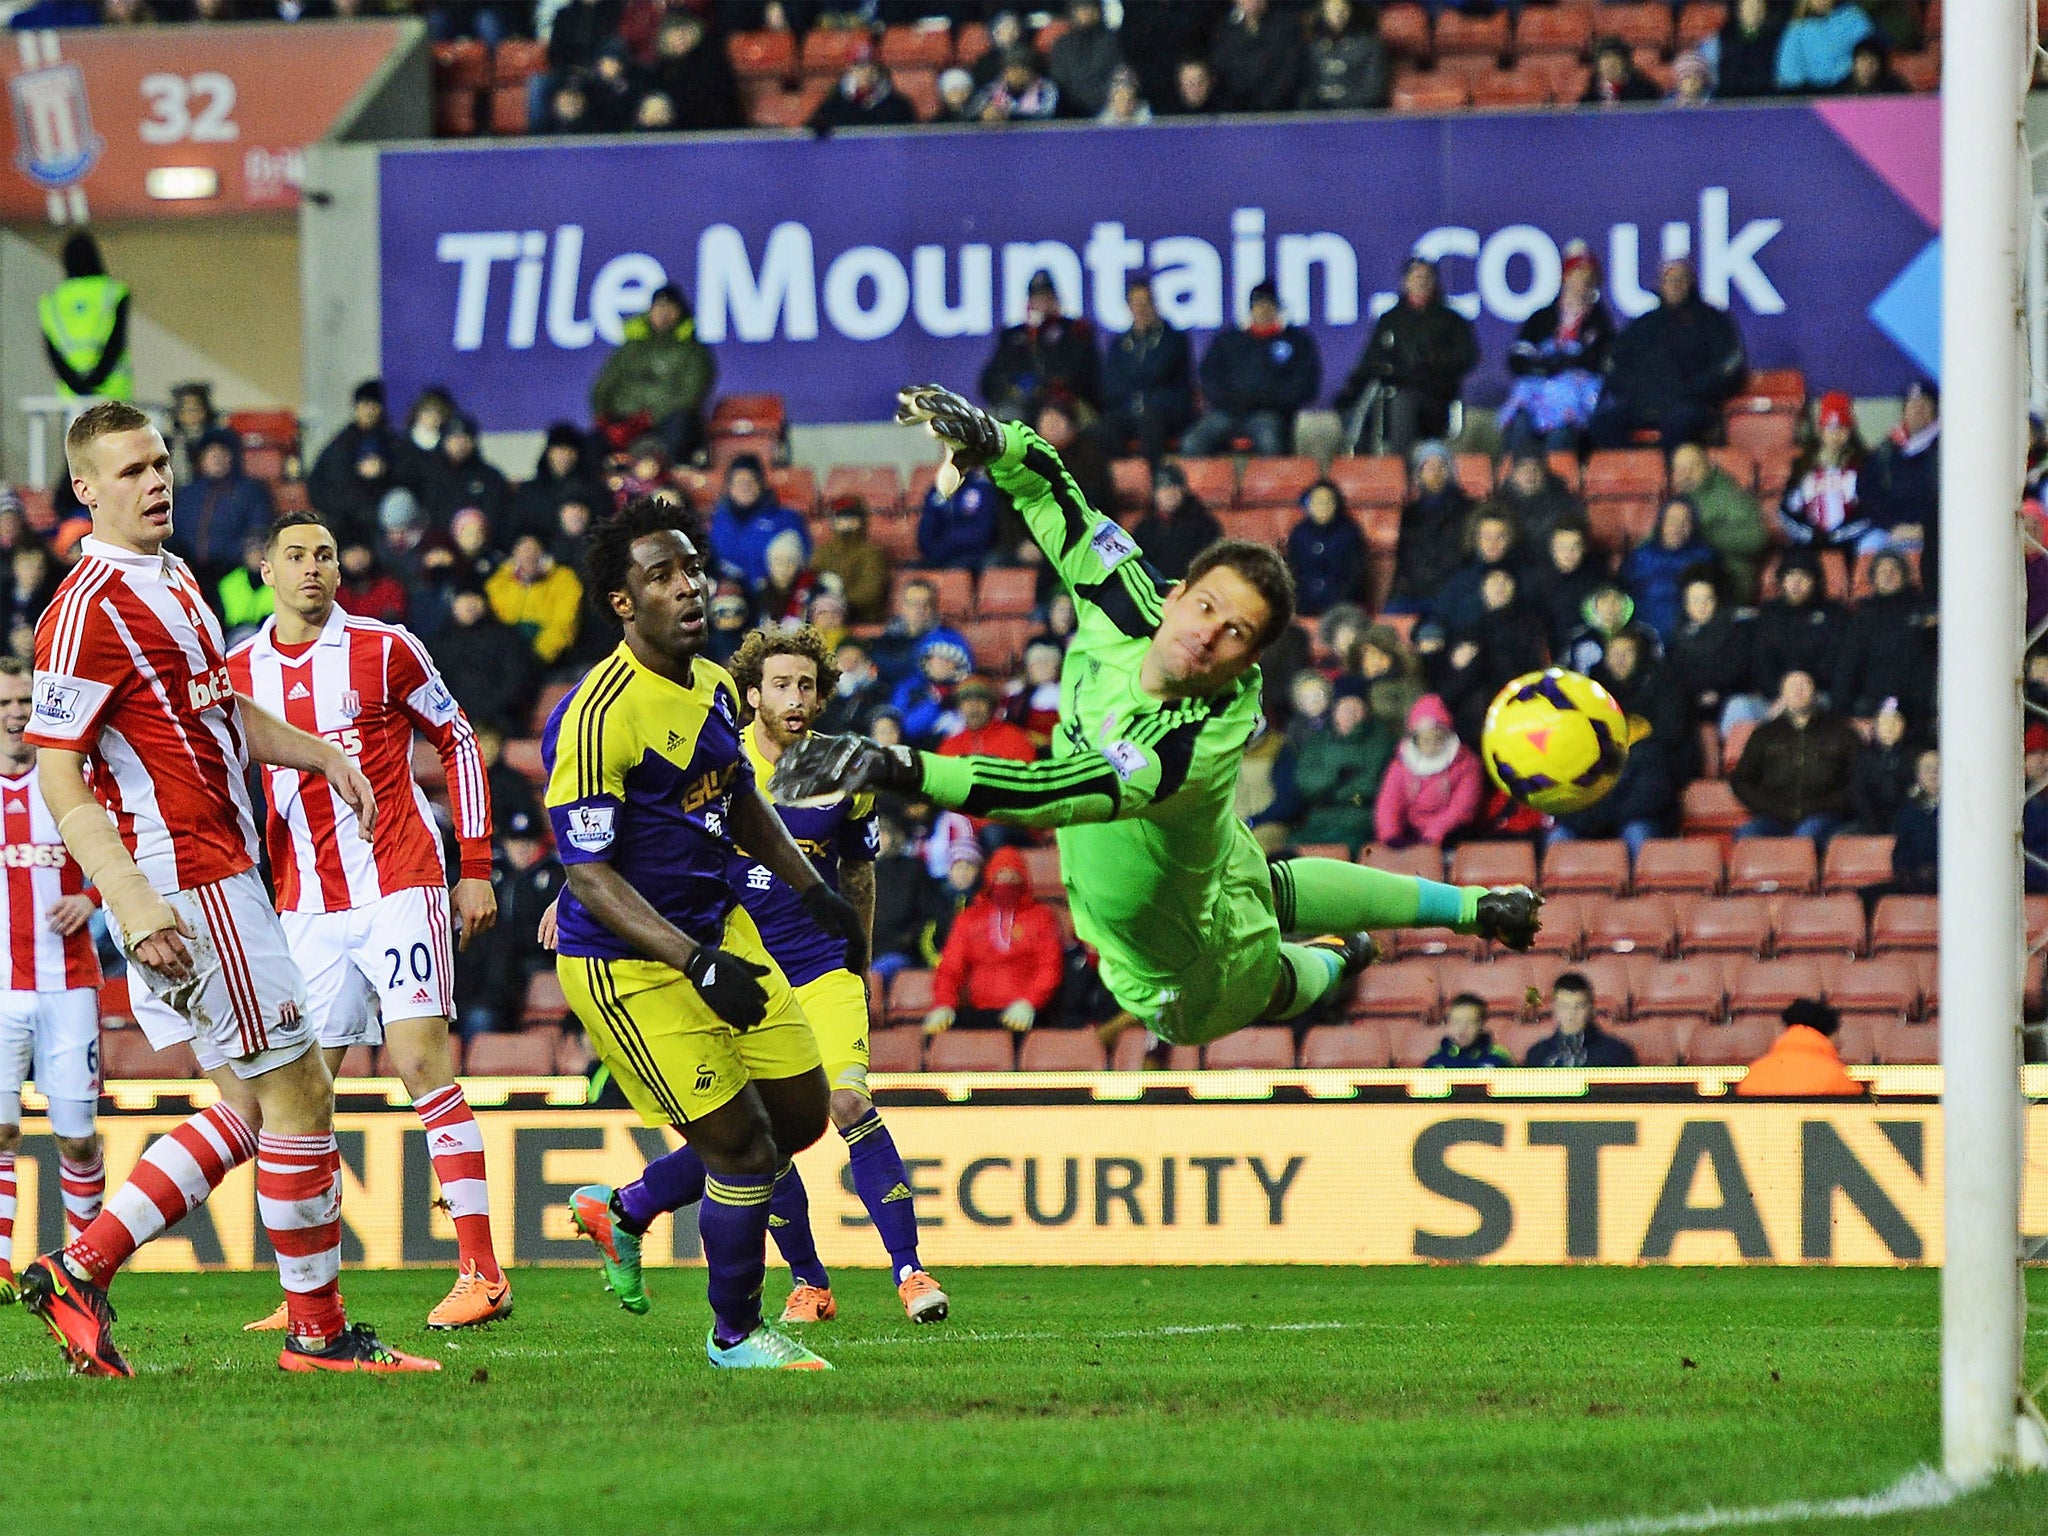 Asmir Begovic dives but fails to save Chico Flores' effort from hitting the back of the net